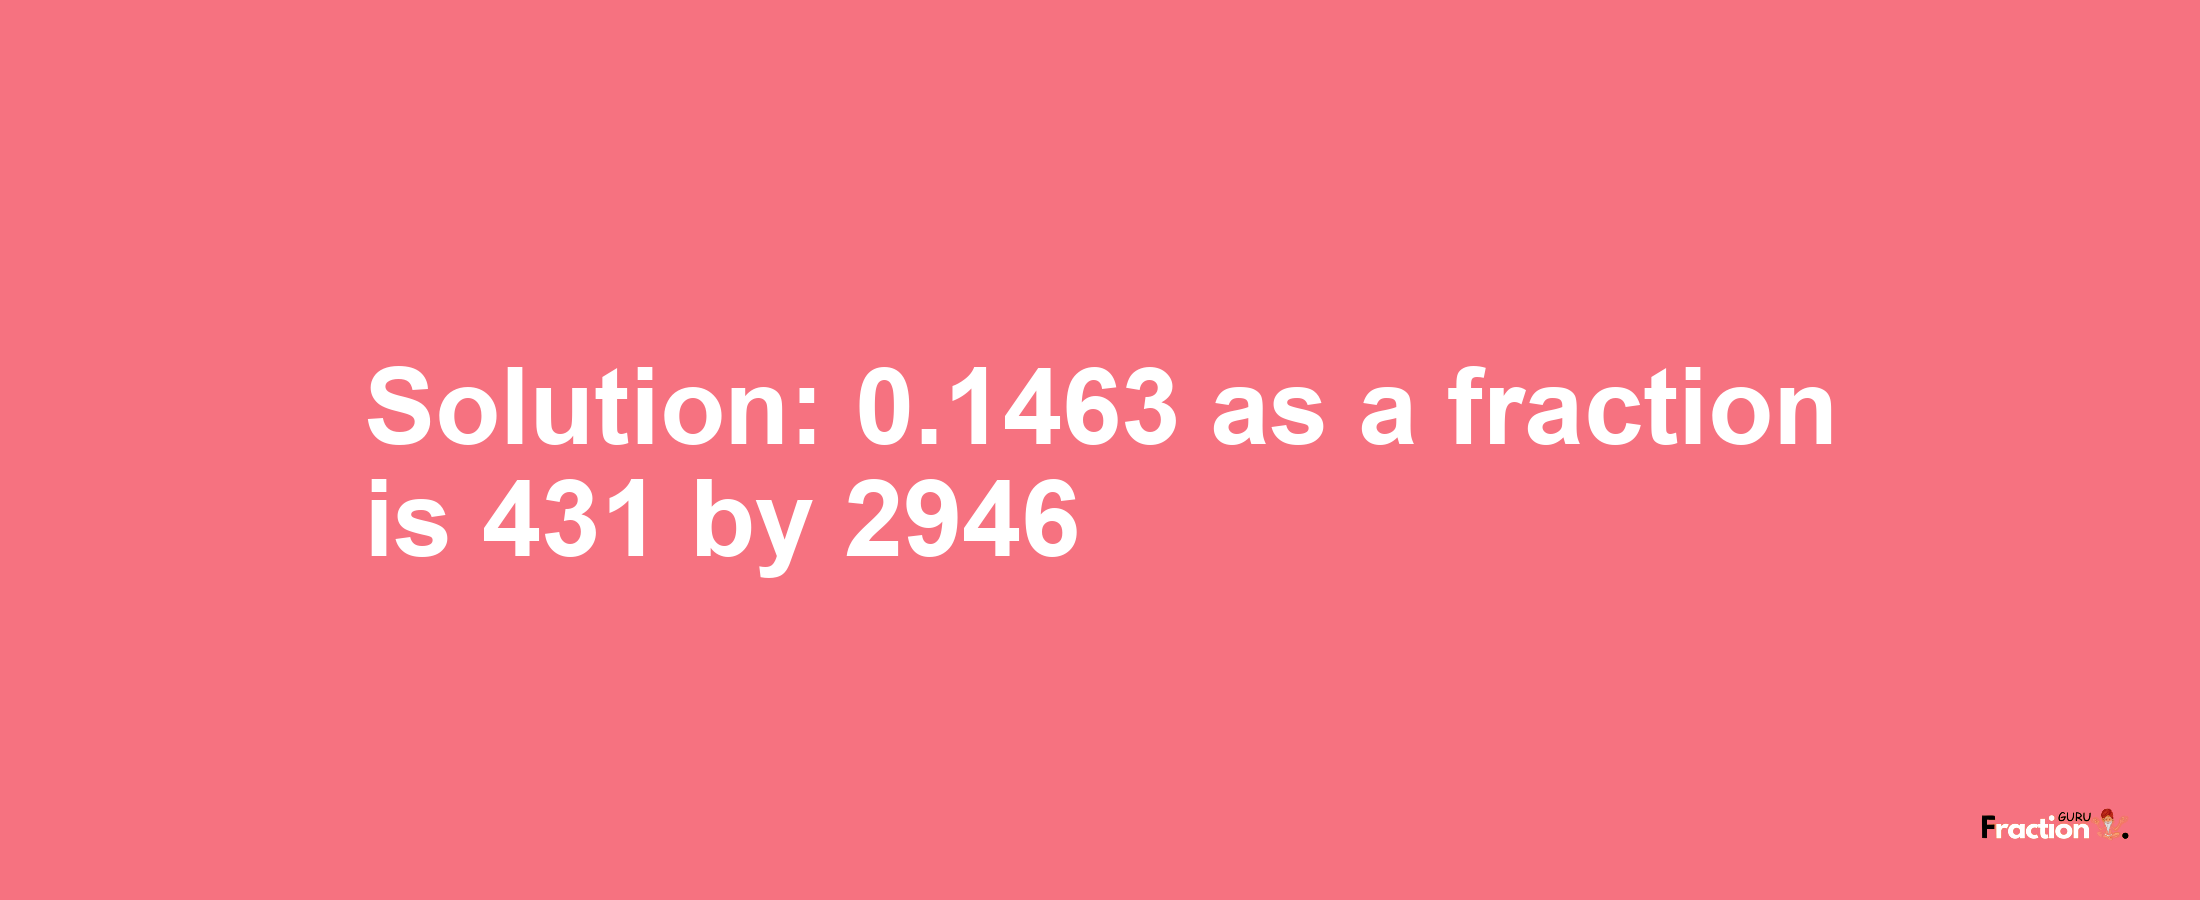 Solution:0.1463 as a fraction is 431/2946